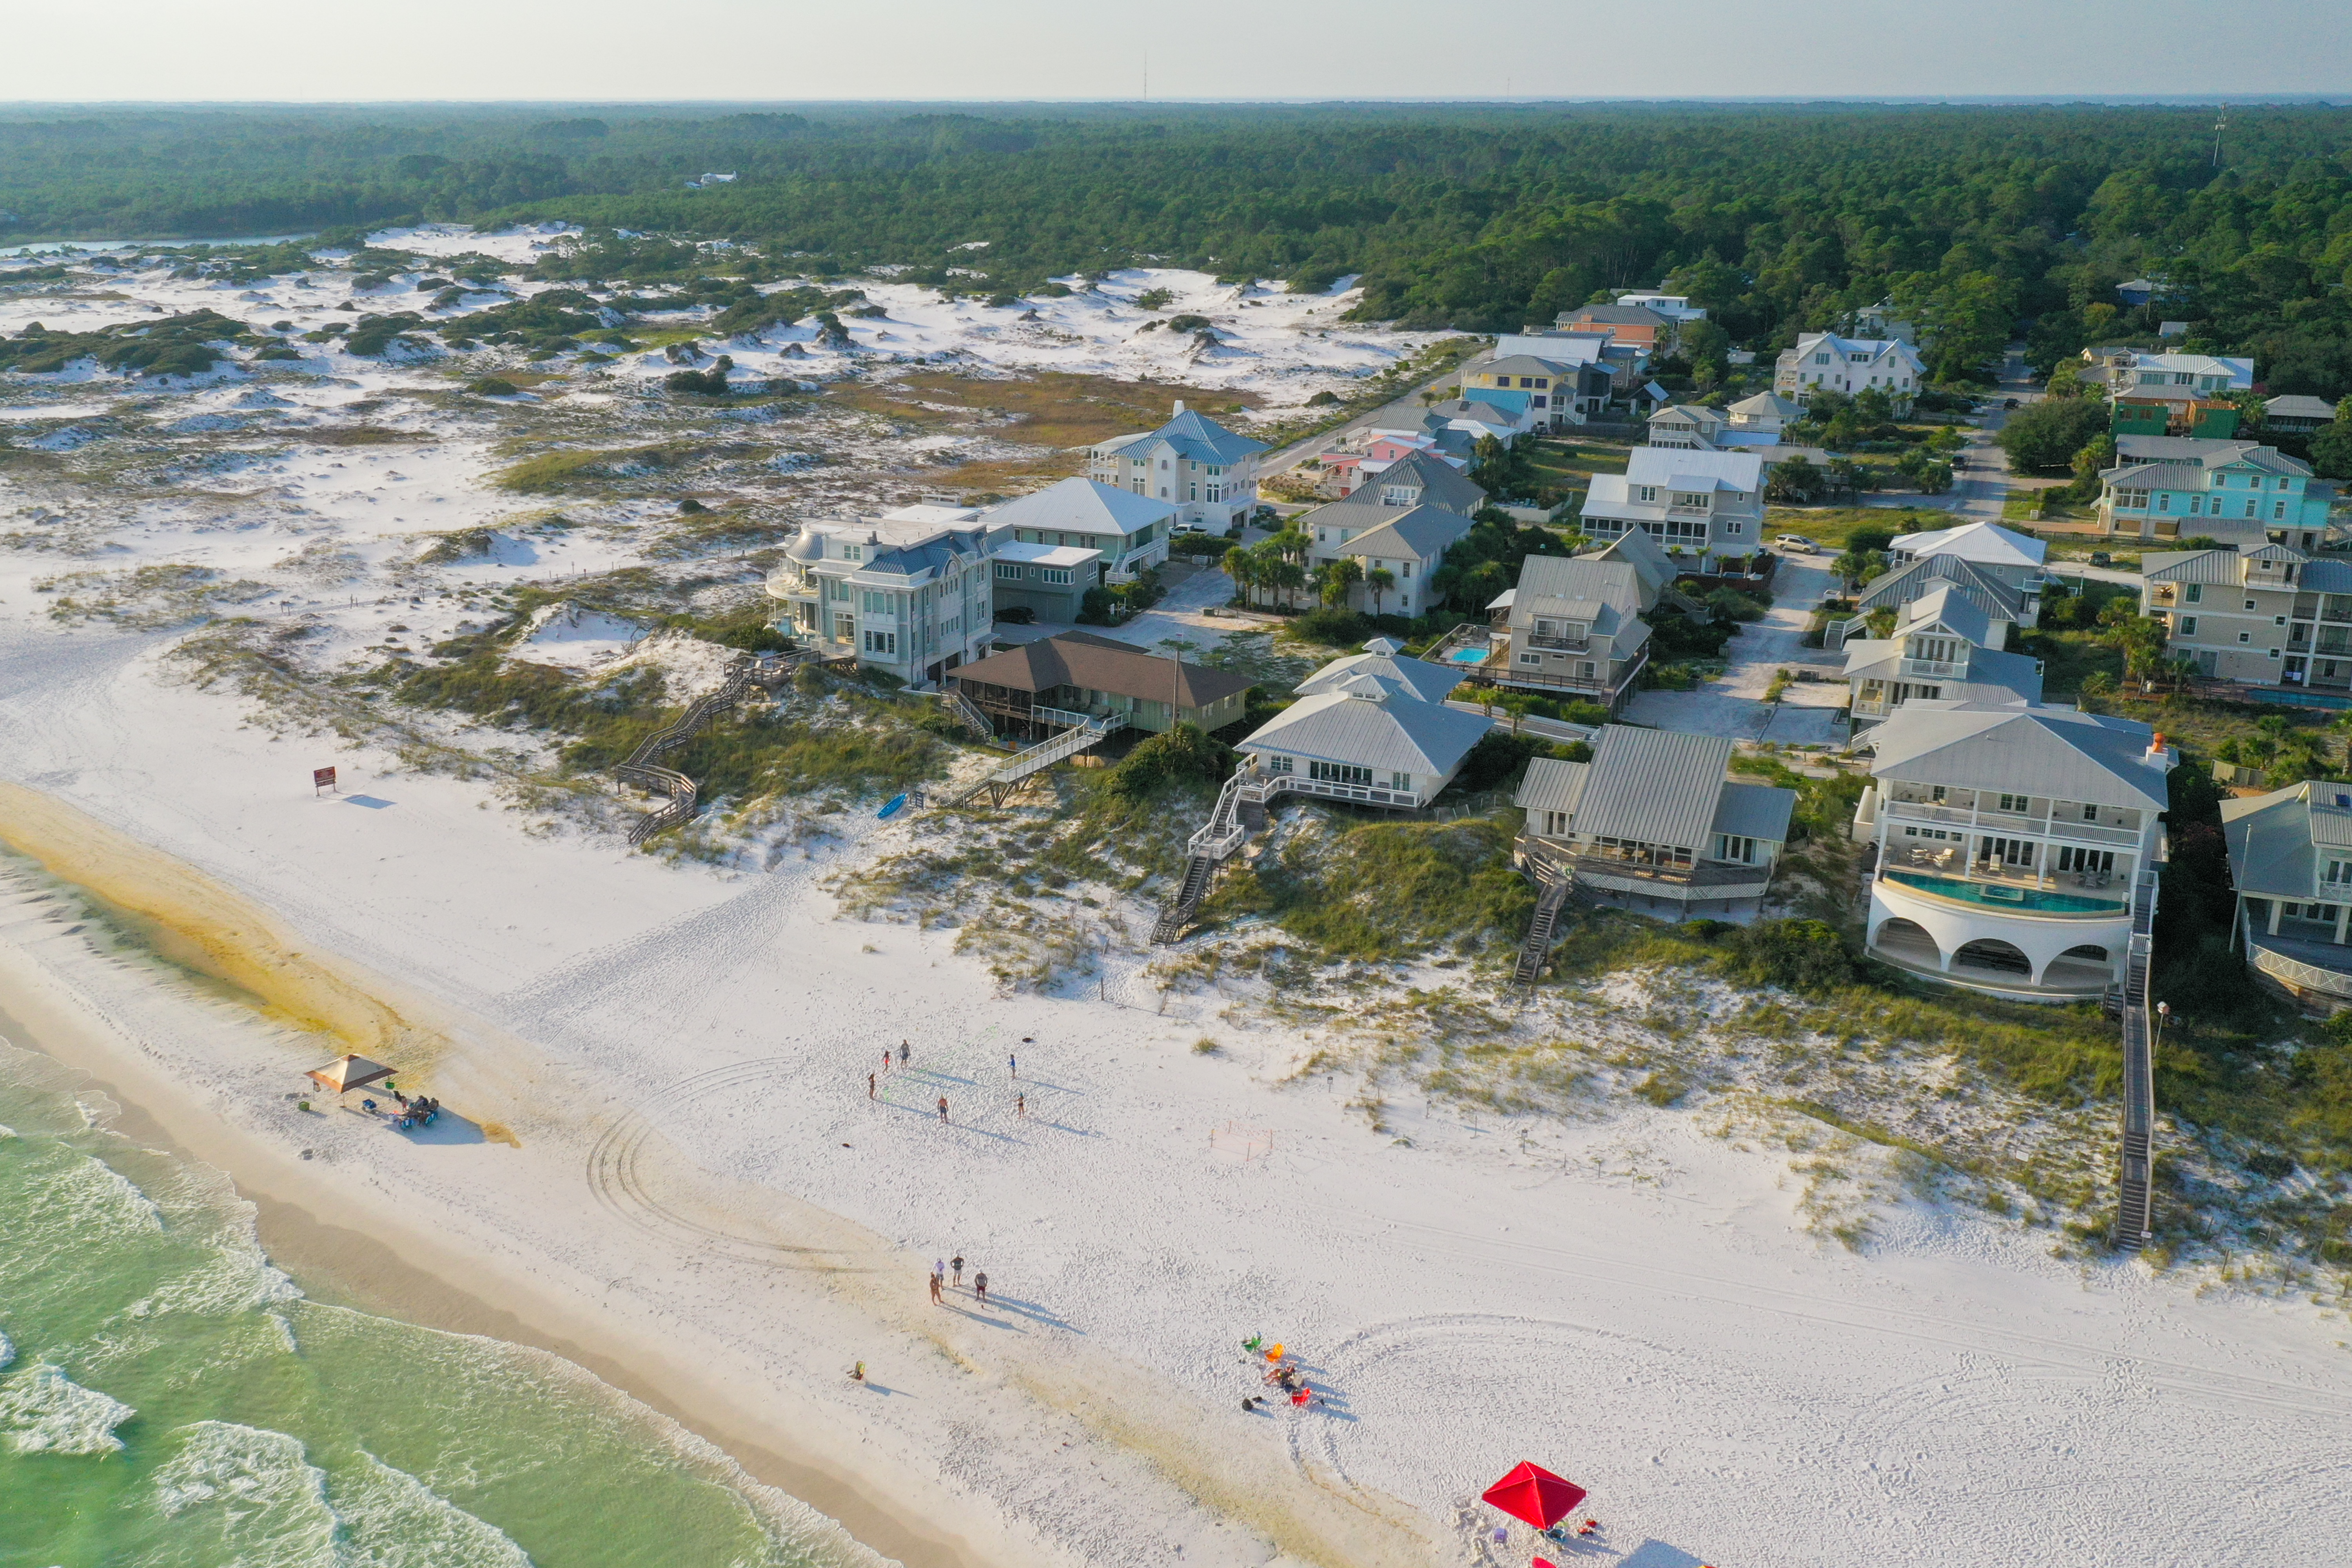 An aerial view of homes on the beach at Grayton Beach just before sunset